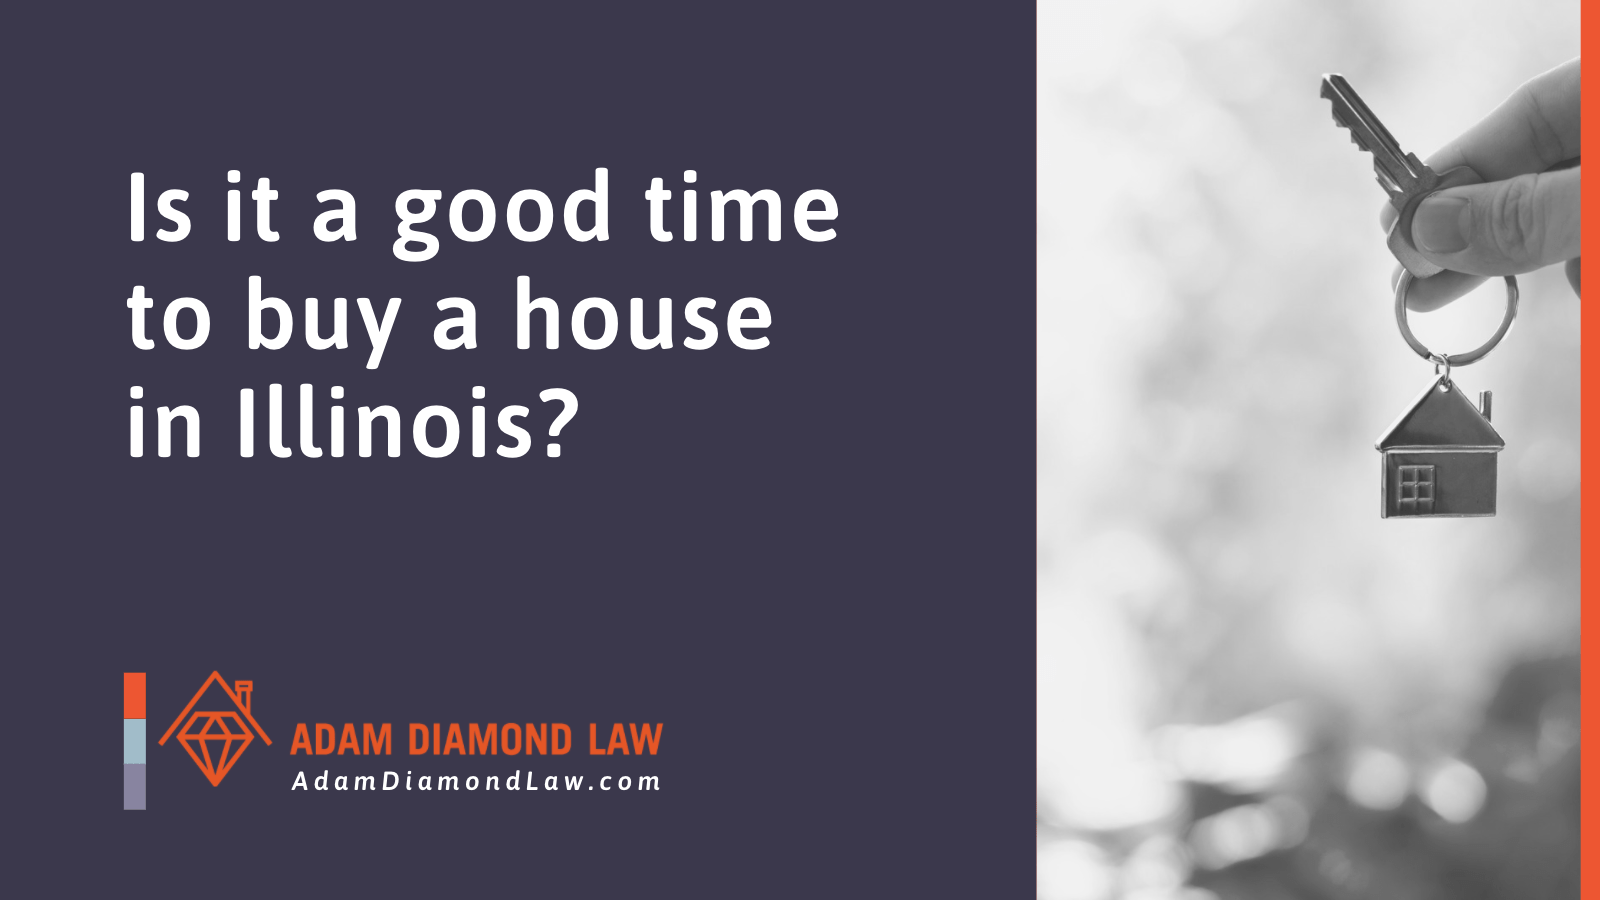 Is it a good time to buy a house in Illinois - Adam Diamond Law | McHenry, IL Residential Real Estate Lawyer